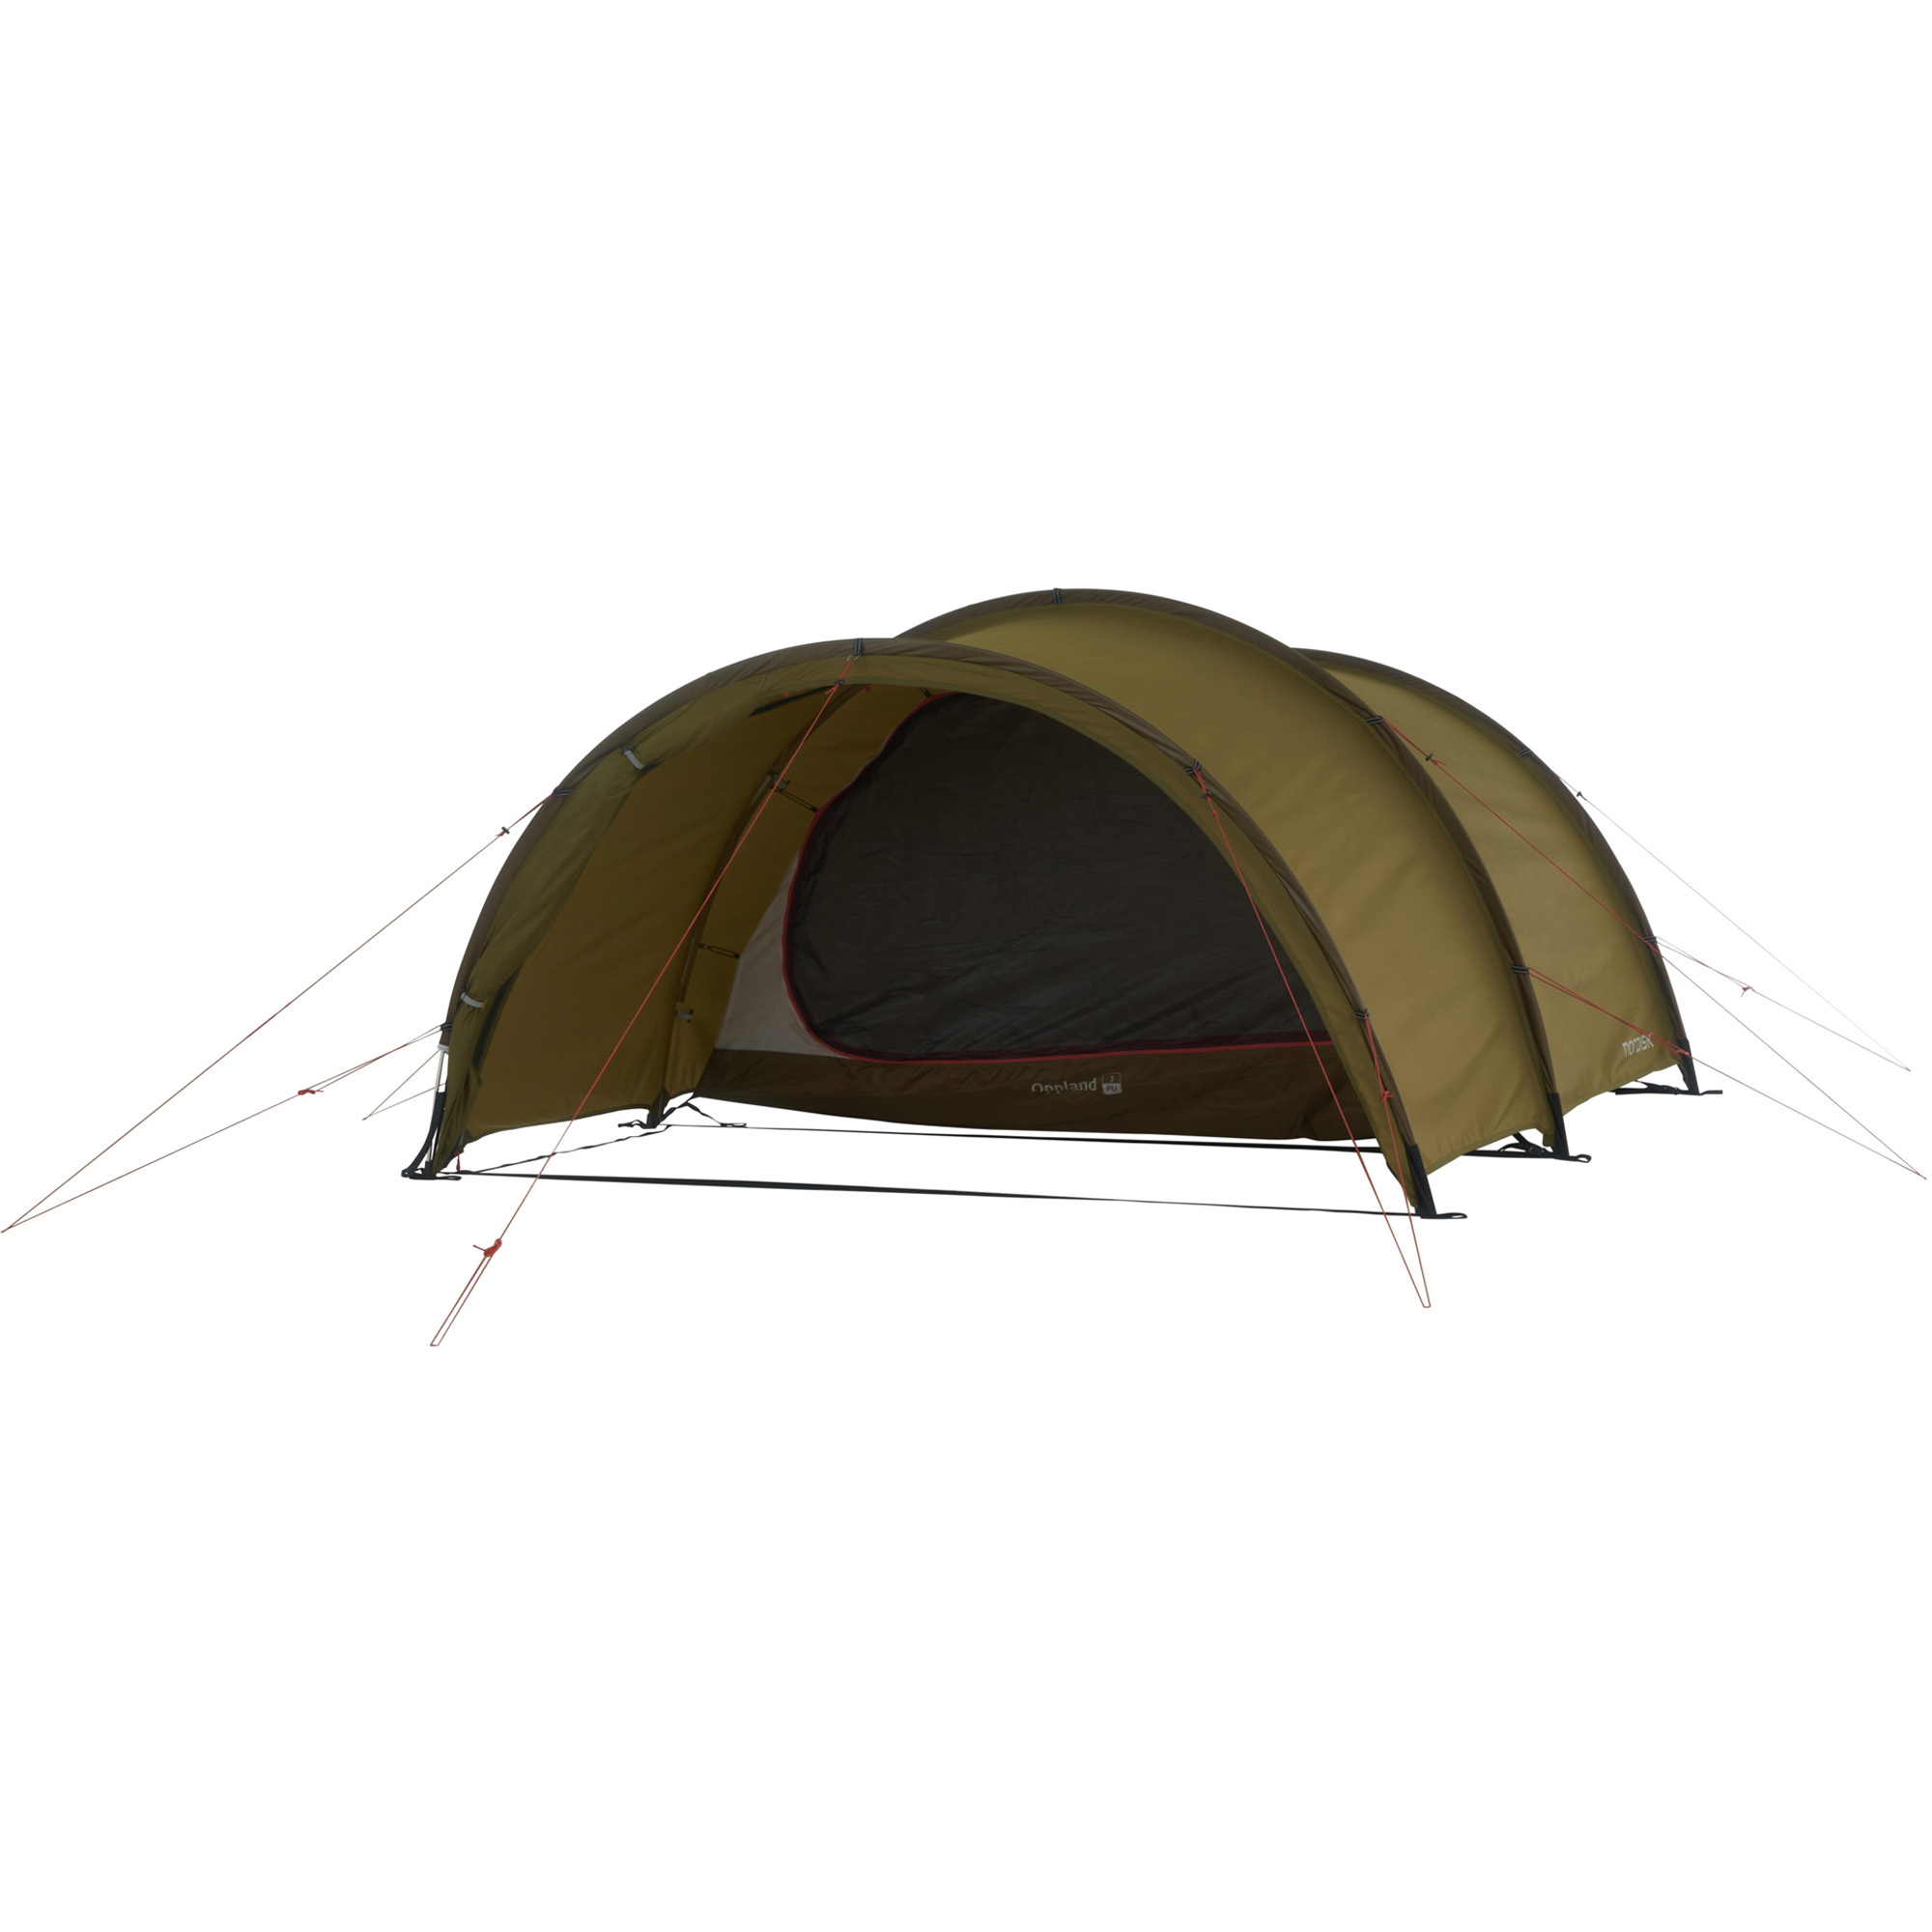 Nordisk Oppland 3 2.0 PU Backpacking Tent